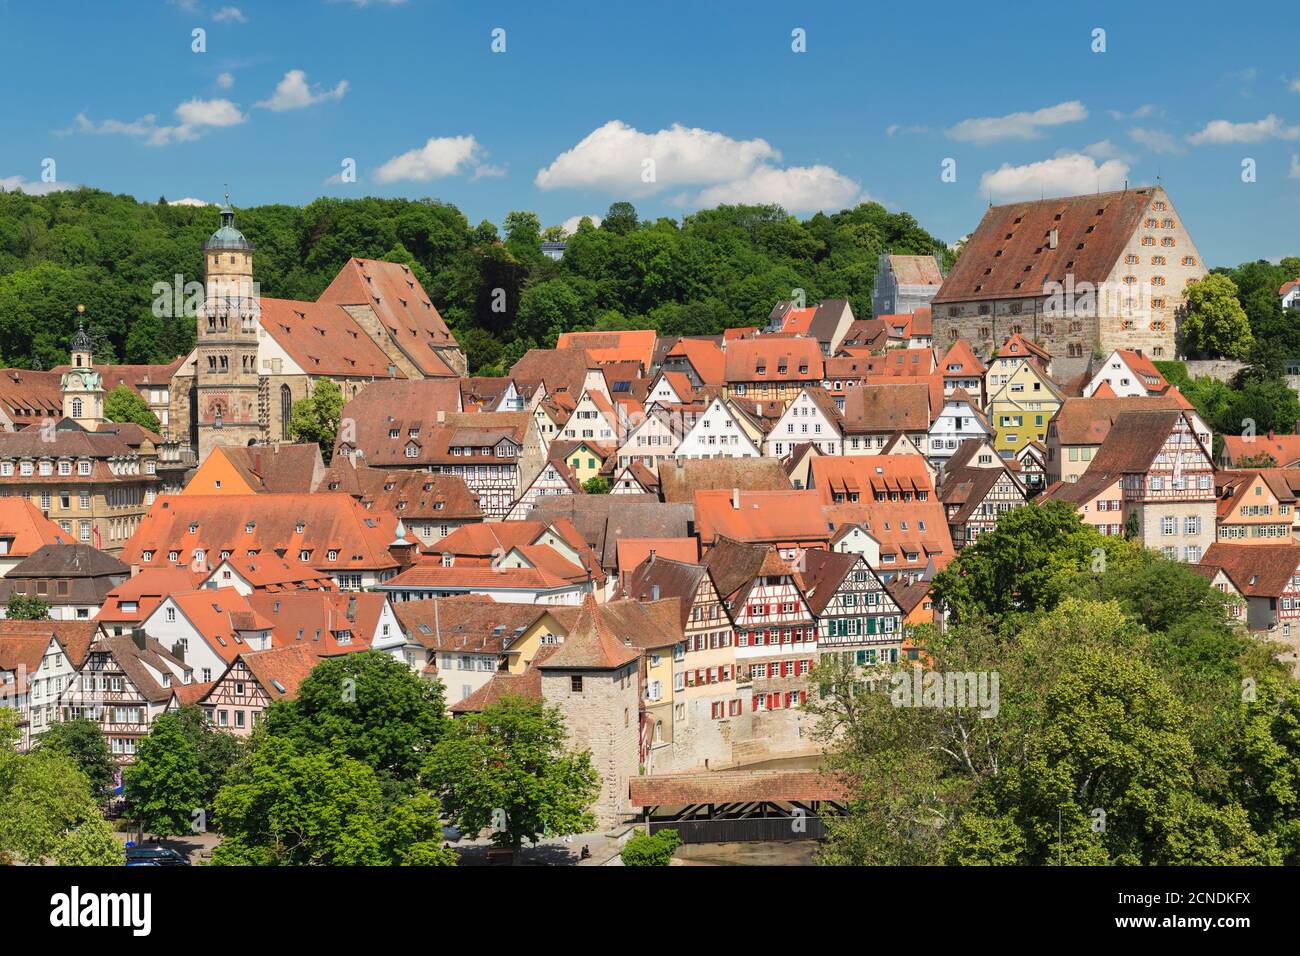 Old town with Sankt Michael church, Schwaebisch Hall, Hohenlohe, Baden-Wurttemberg, Germany, Europe Stock Photo